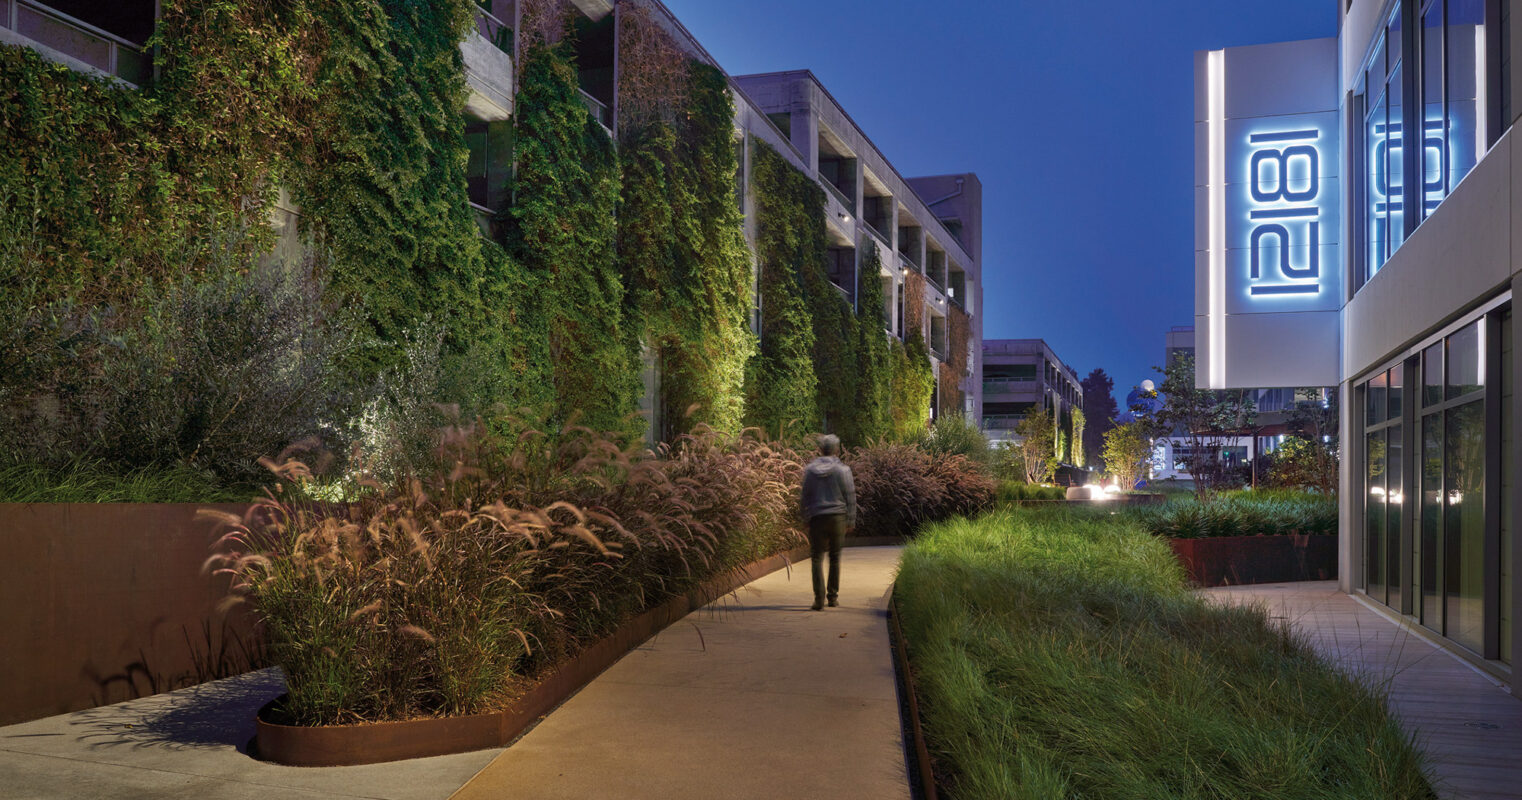 Urban oasis: a tranquil evening stroll by modern architecture adorned with lush vertical gardens and soft ambient lighting.